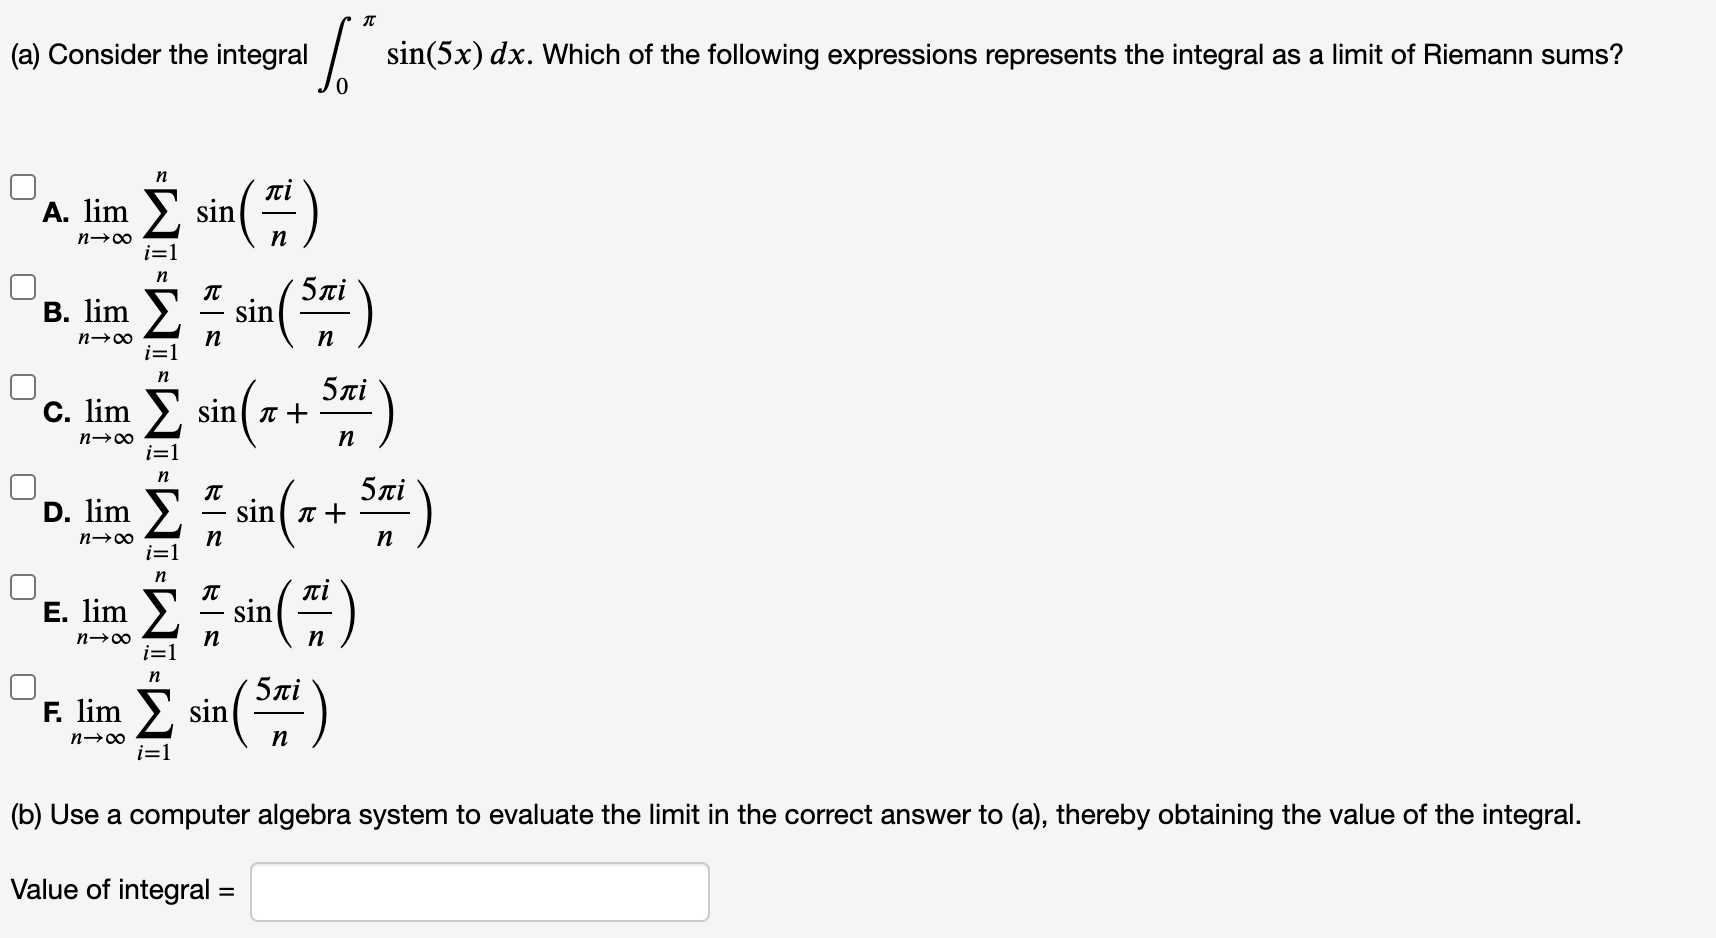 (a) Consider the integral
| sin(5x) dx. Which of the following expressions represents the integral as a limit of Riemann sums?
n
A. lim
sin
i=1
В. lim
5ai
sin
n
5ni
C. lim >, sin( a +
i=1
n
5лі
sin( T +
D. lim
n→∞
n
Е. lim
πί
sin
n→∞
n
5ni
F. lim >, sin
n
i=1
(b) Use a computer algebra system to evaluate the limit in the correct answer to (a), thereby obtaining the value of the integral.
Value of integral =
